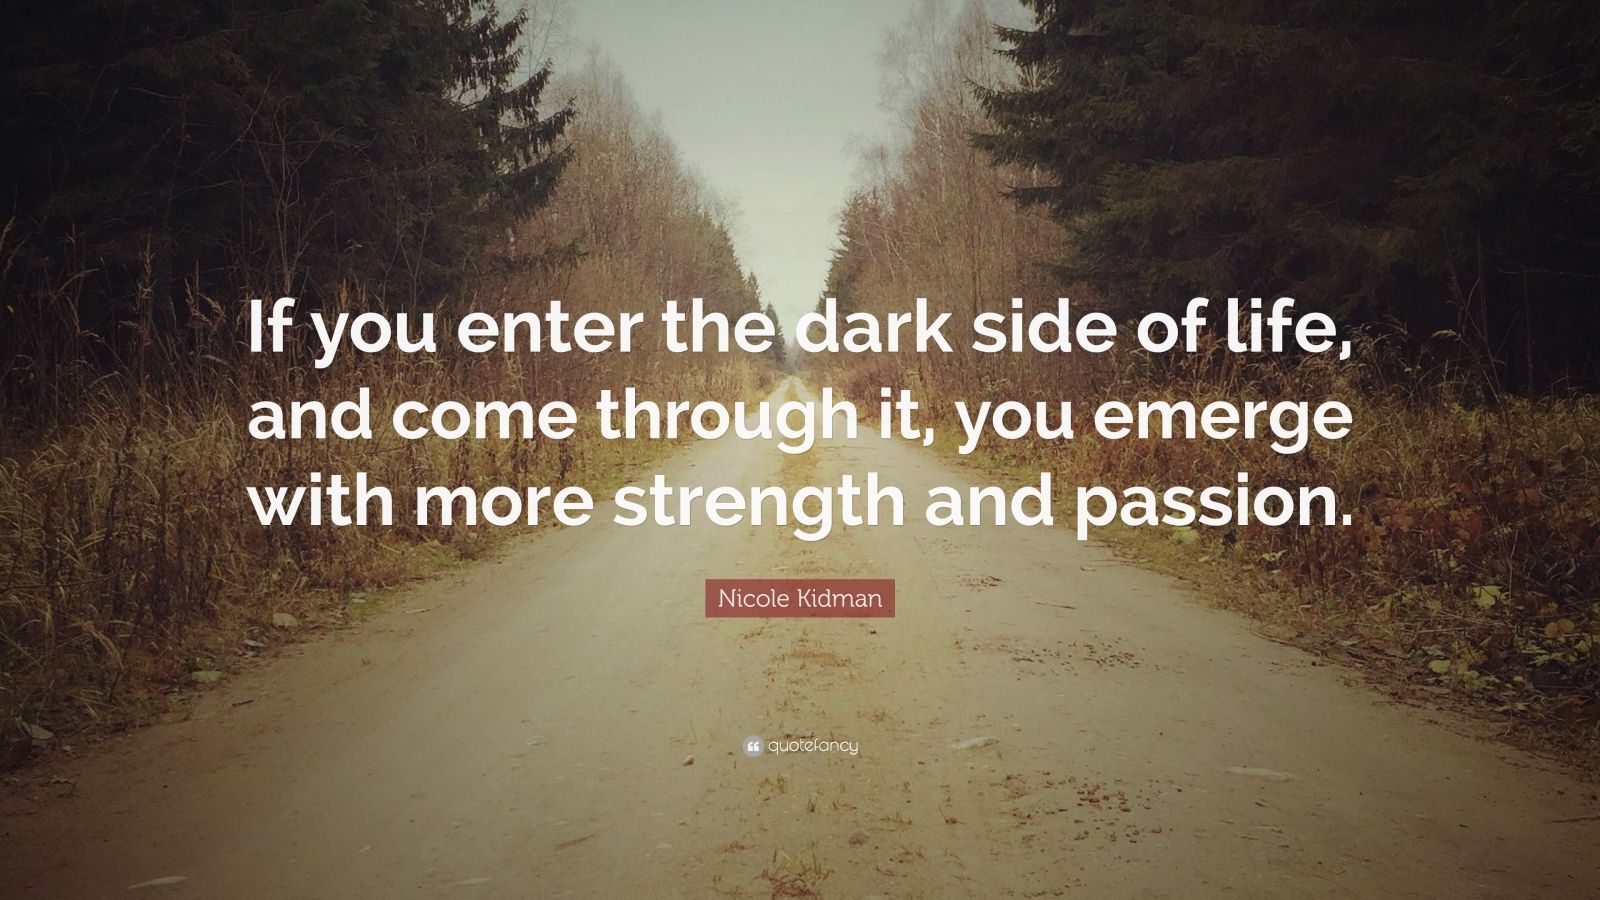 Nicole Kidman Quote: “If you enter the dark side of life, and come ...